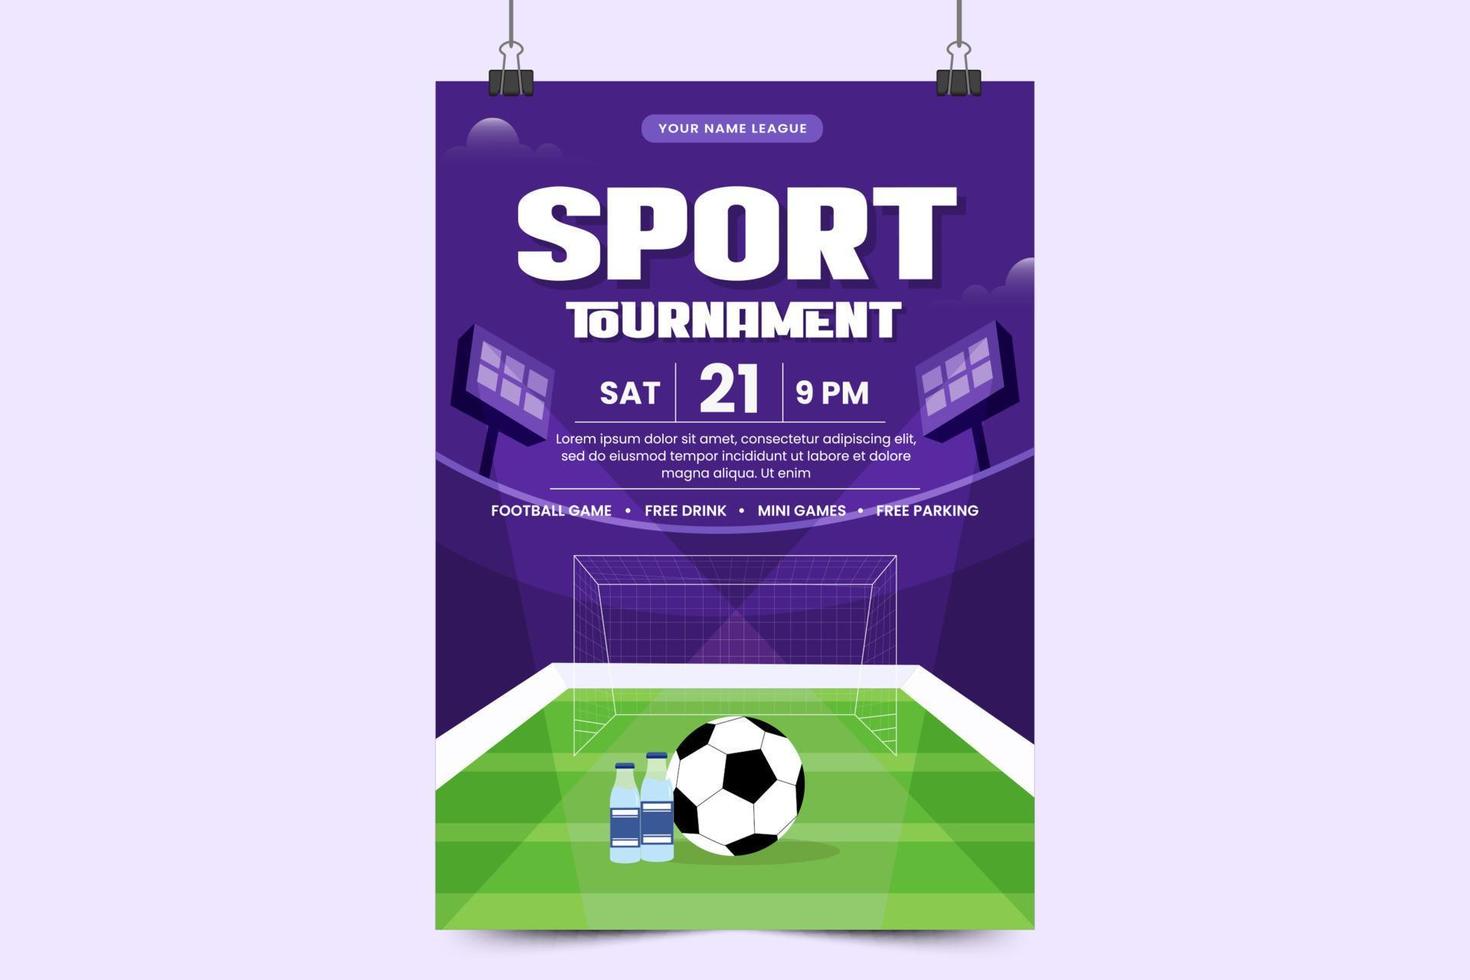 Football tournament, sport event flyer or poster design template easy to customize simple and elegant design vector